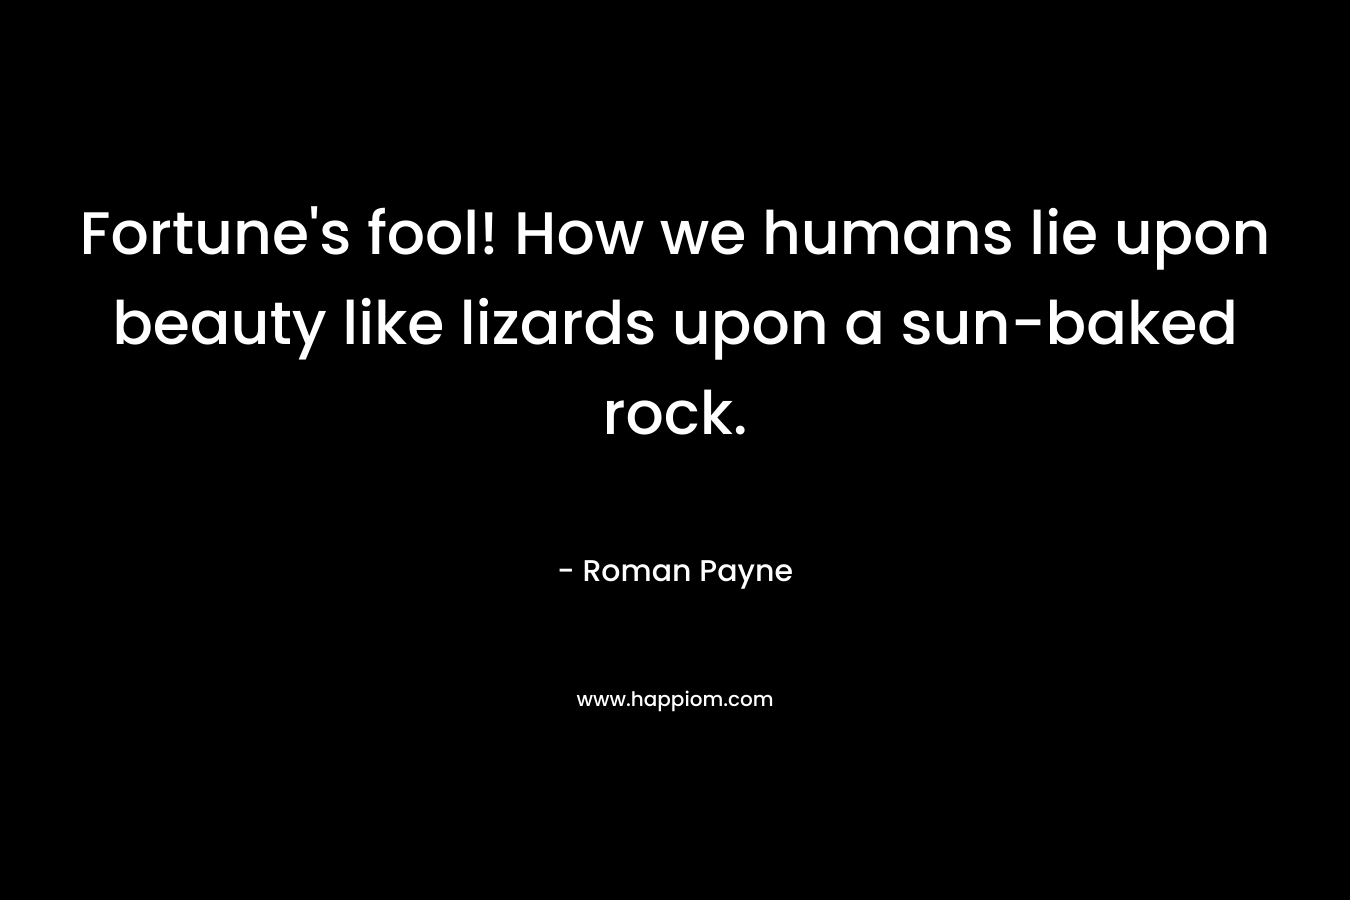 Fortune's fool! How we humans lie upon beauty like lizards upon a sun-baked rock.